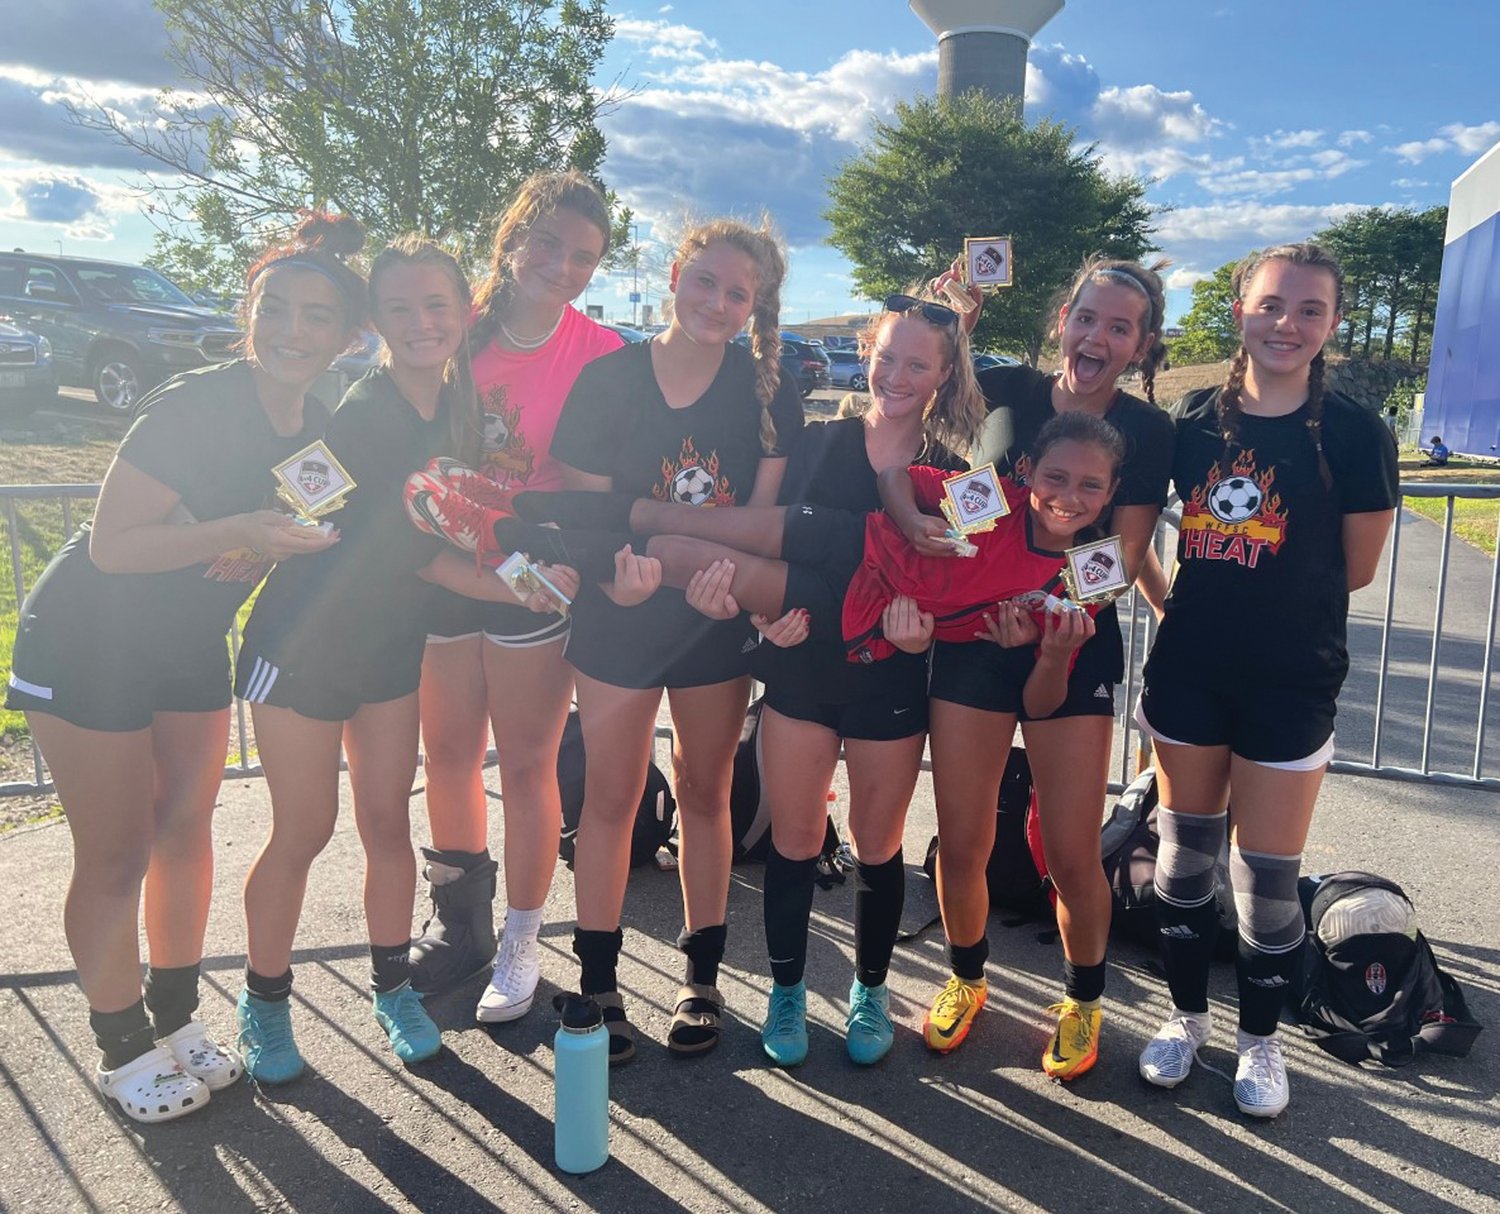 16-U CHAMPS: The WFFSC 16-U team that won at the Revolution tournament included: Ava Fischer, Madison Adams, Sloan Hogan, Jadyn Moore, Isabella Cambio, Lorelai Leddy, Emma Rattigan and their biggest supporter Layla Cambio (being held).